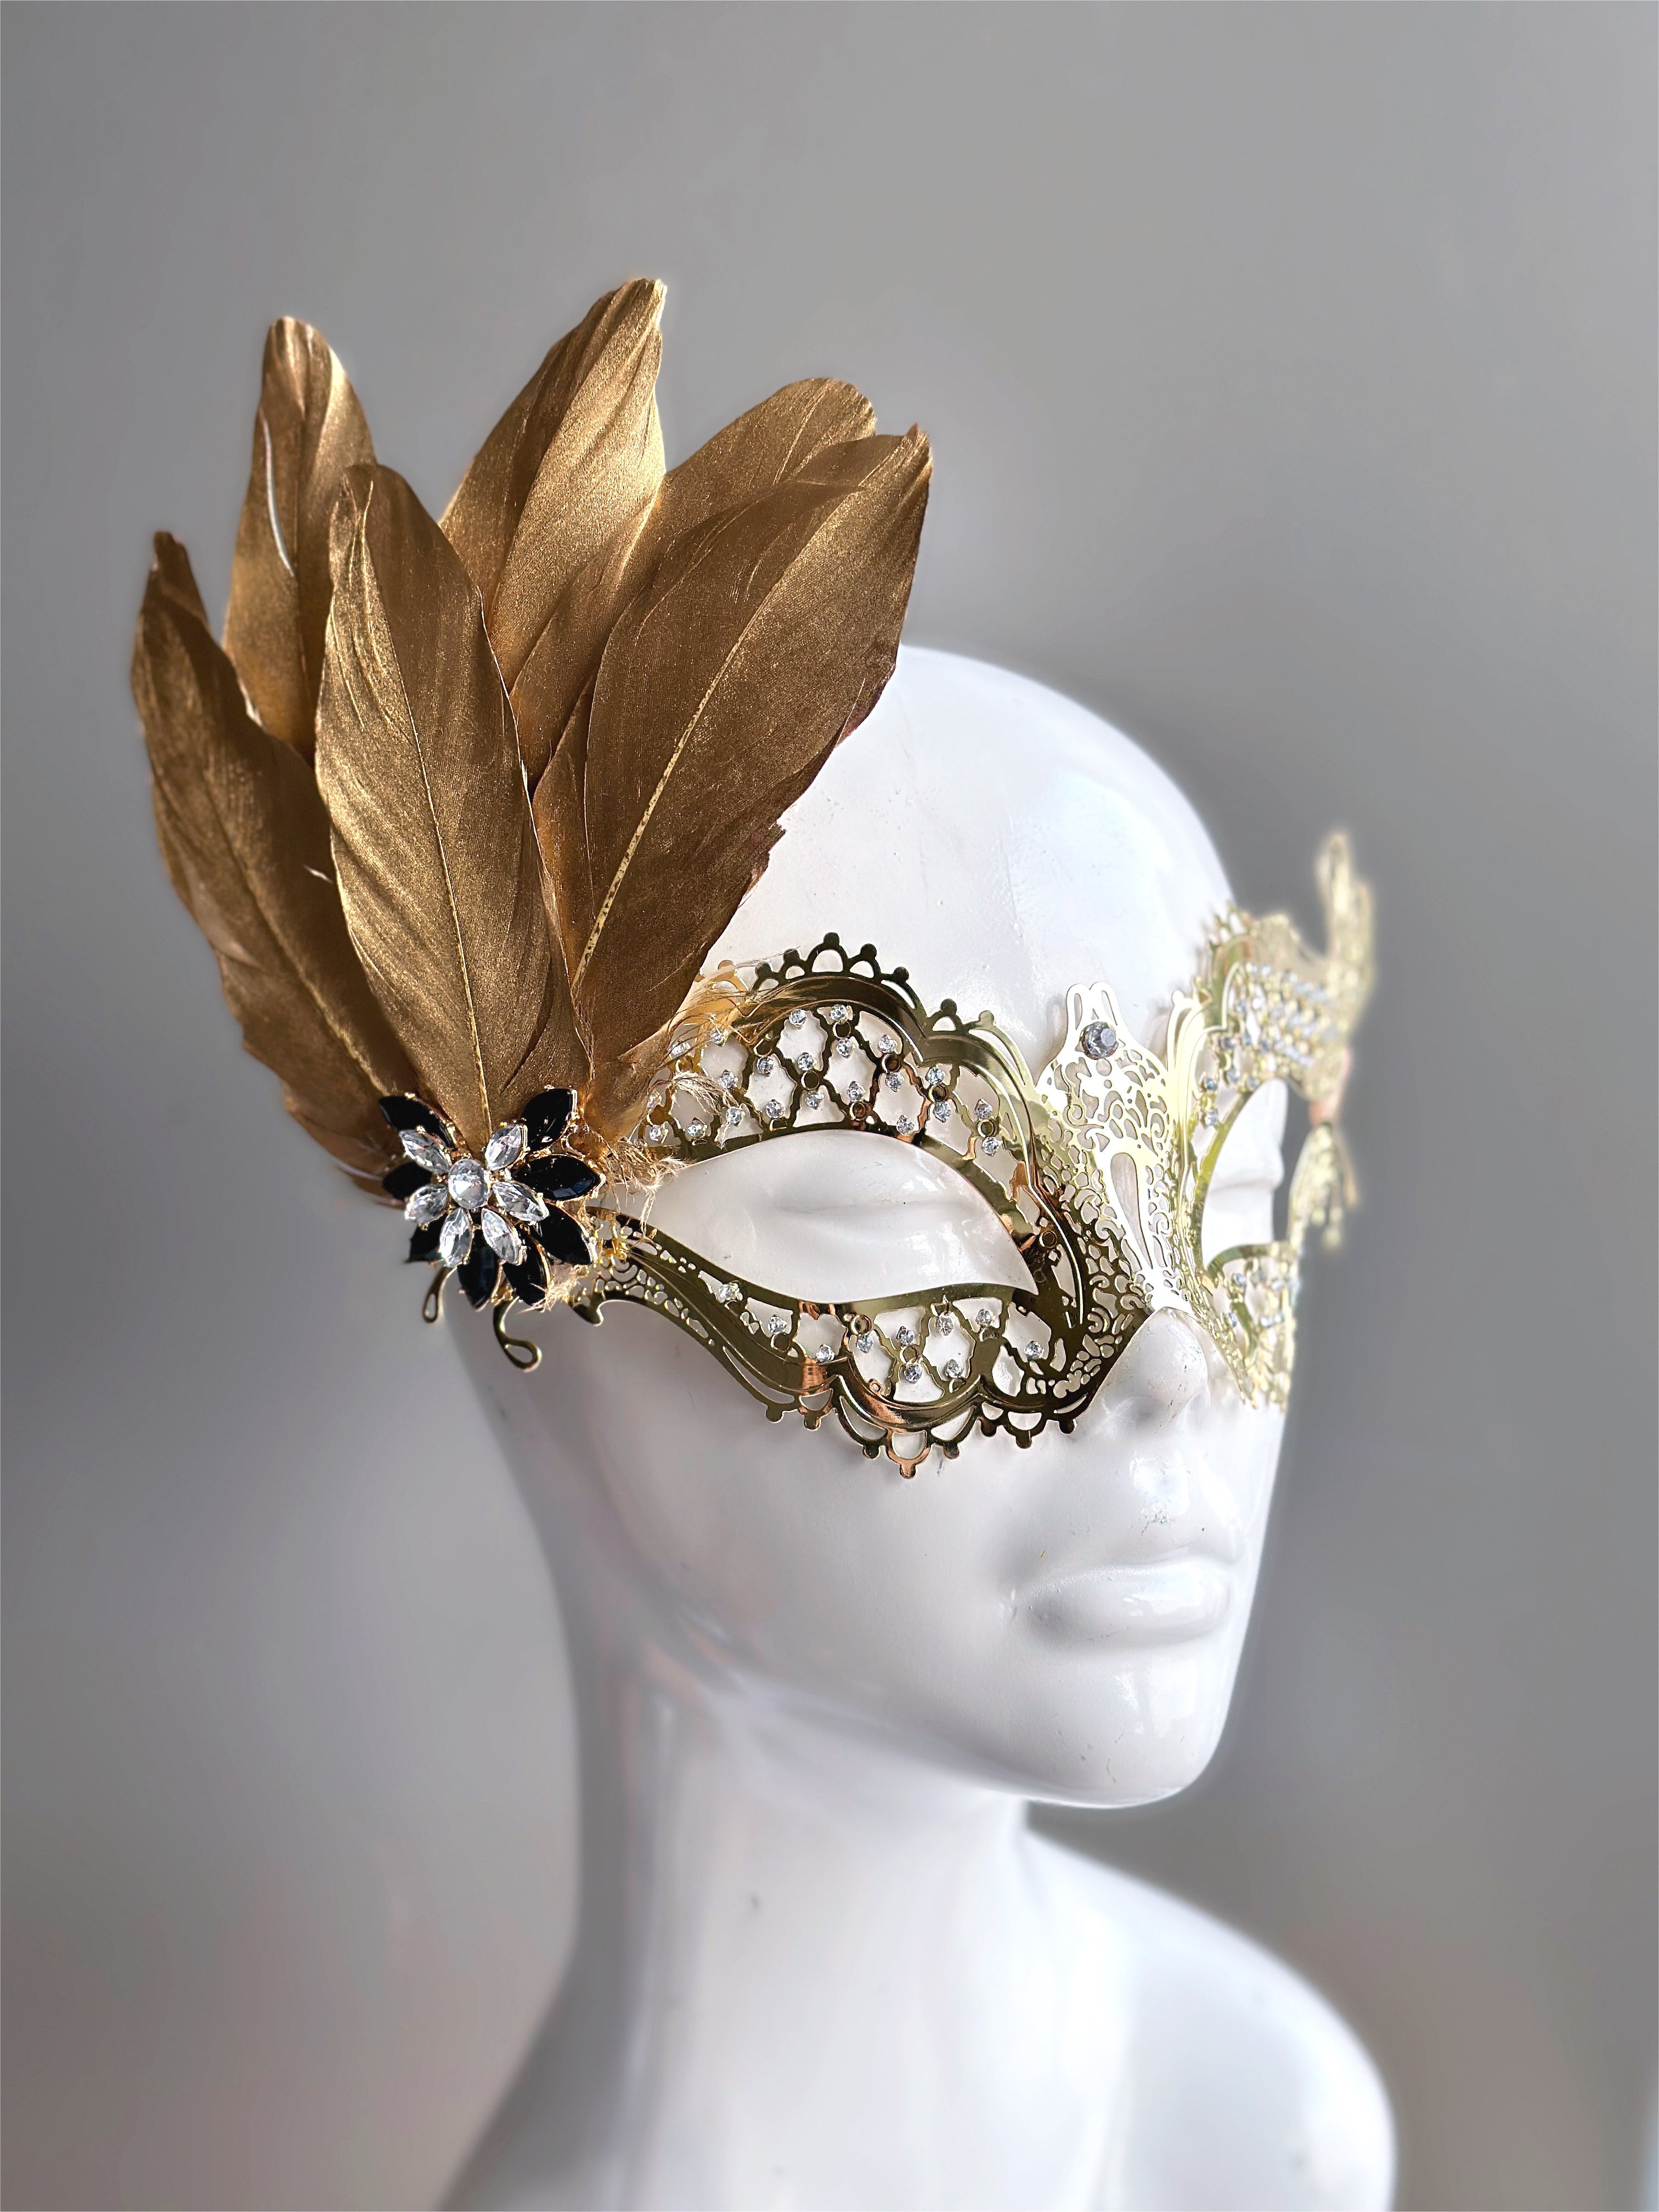 Womens masquerade laser cut metal mask in gold with gold feathers for sale.